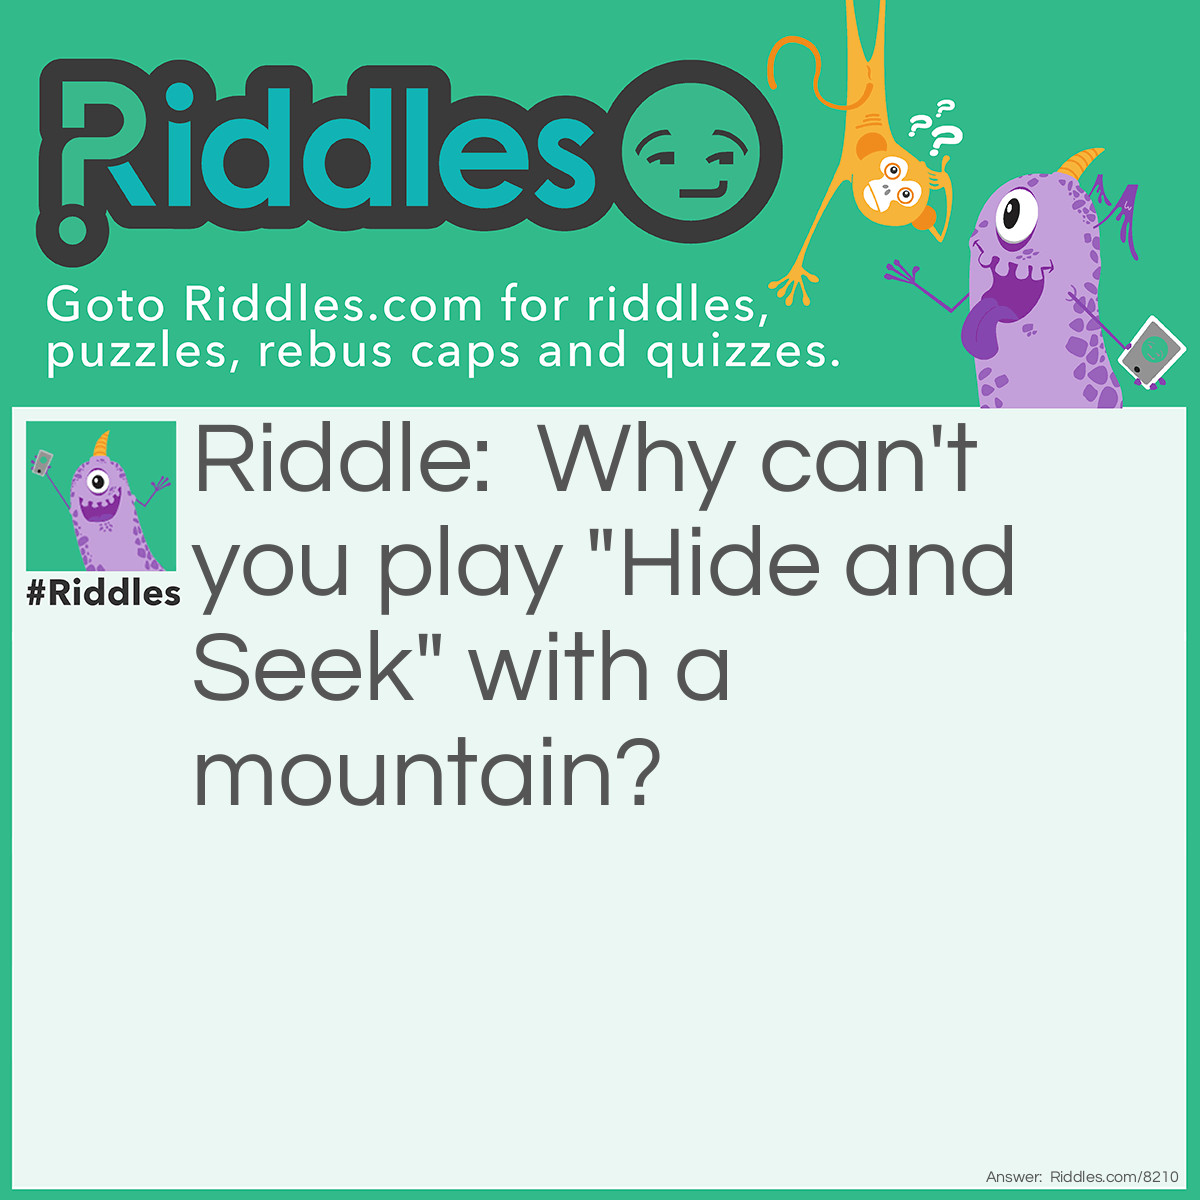 Riddle: Why can't you play "Hide and Seek" with a mountain? Answer: Because the mountain always "peaks"!